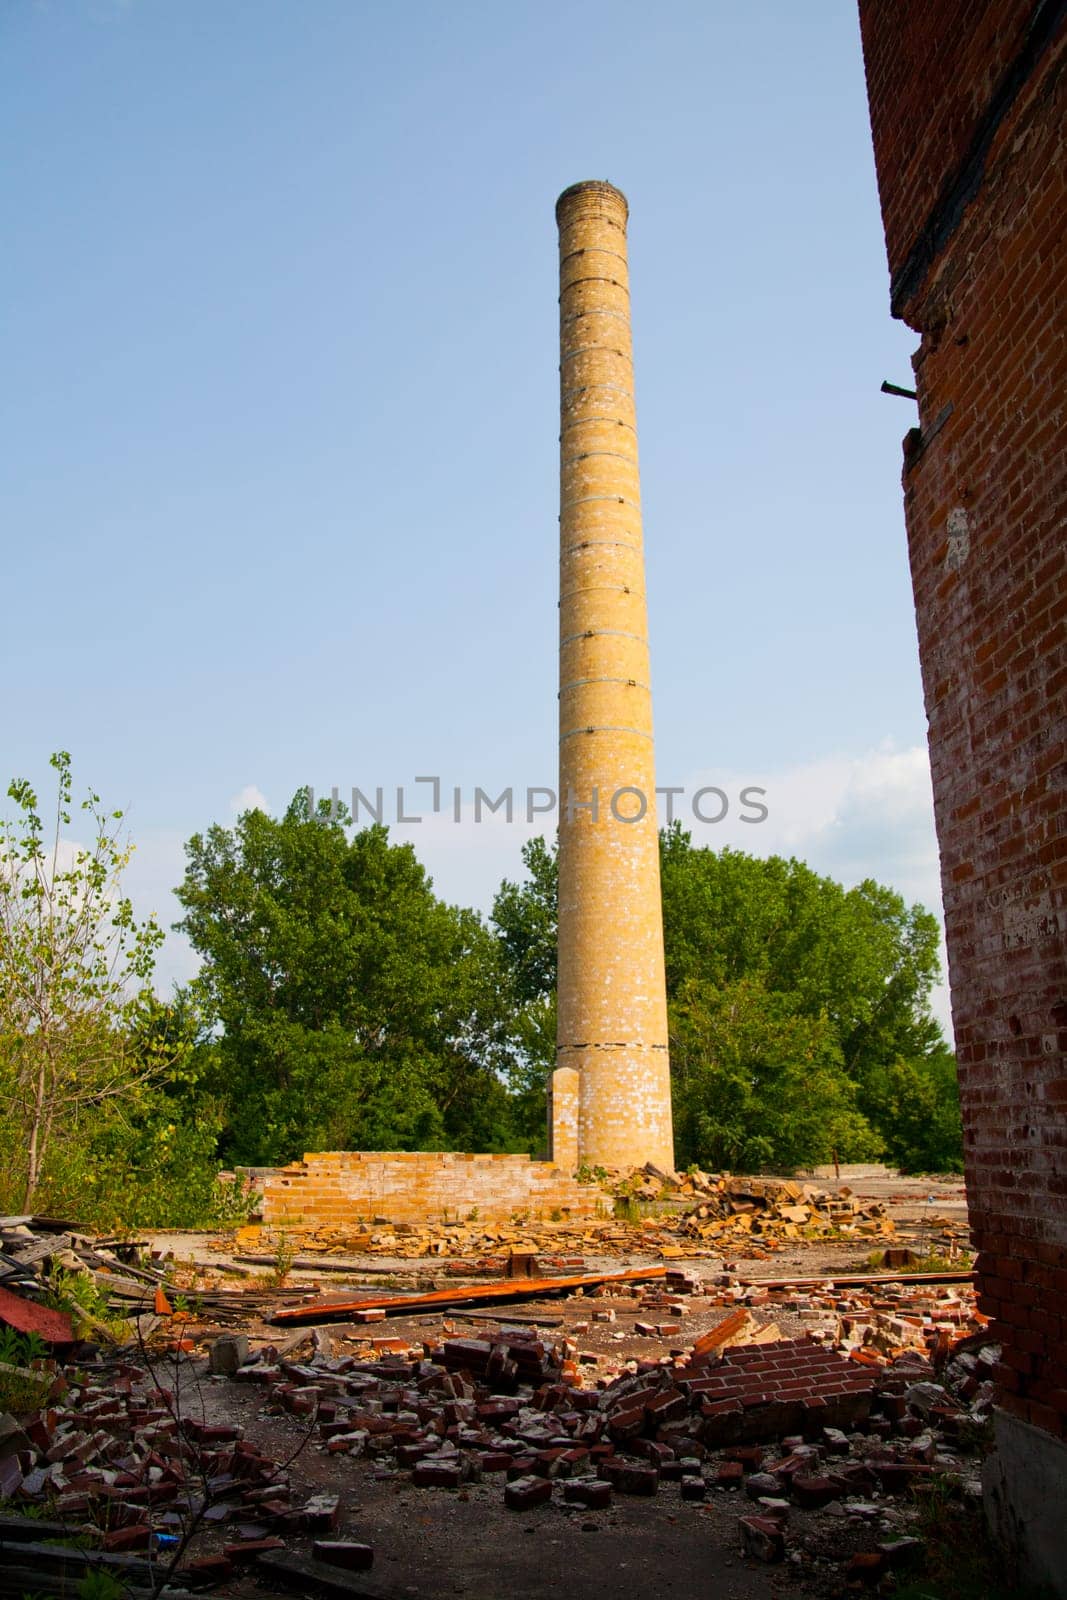 Iconic industrial relic stands tall amidst a decaying landscape, symbolizing the passage of time and nature's reclamation. Pierceton Factory, Indiana.